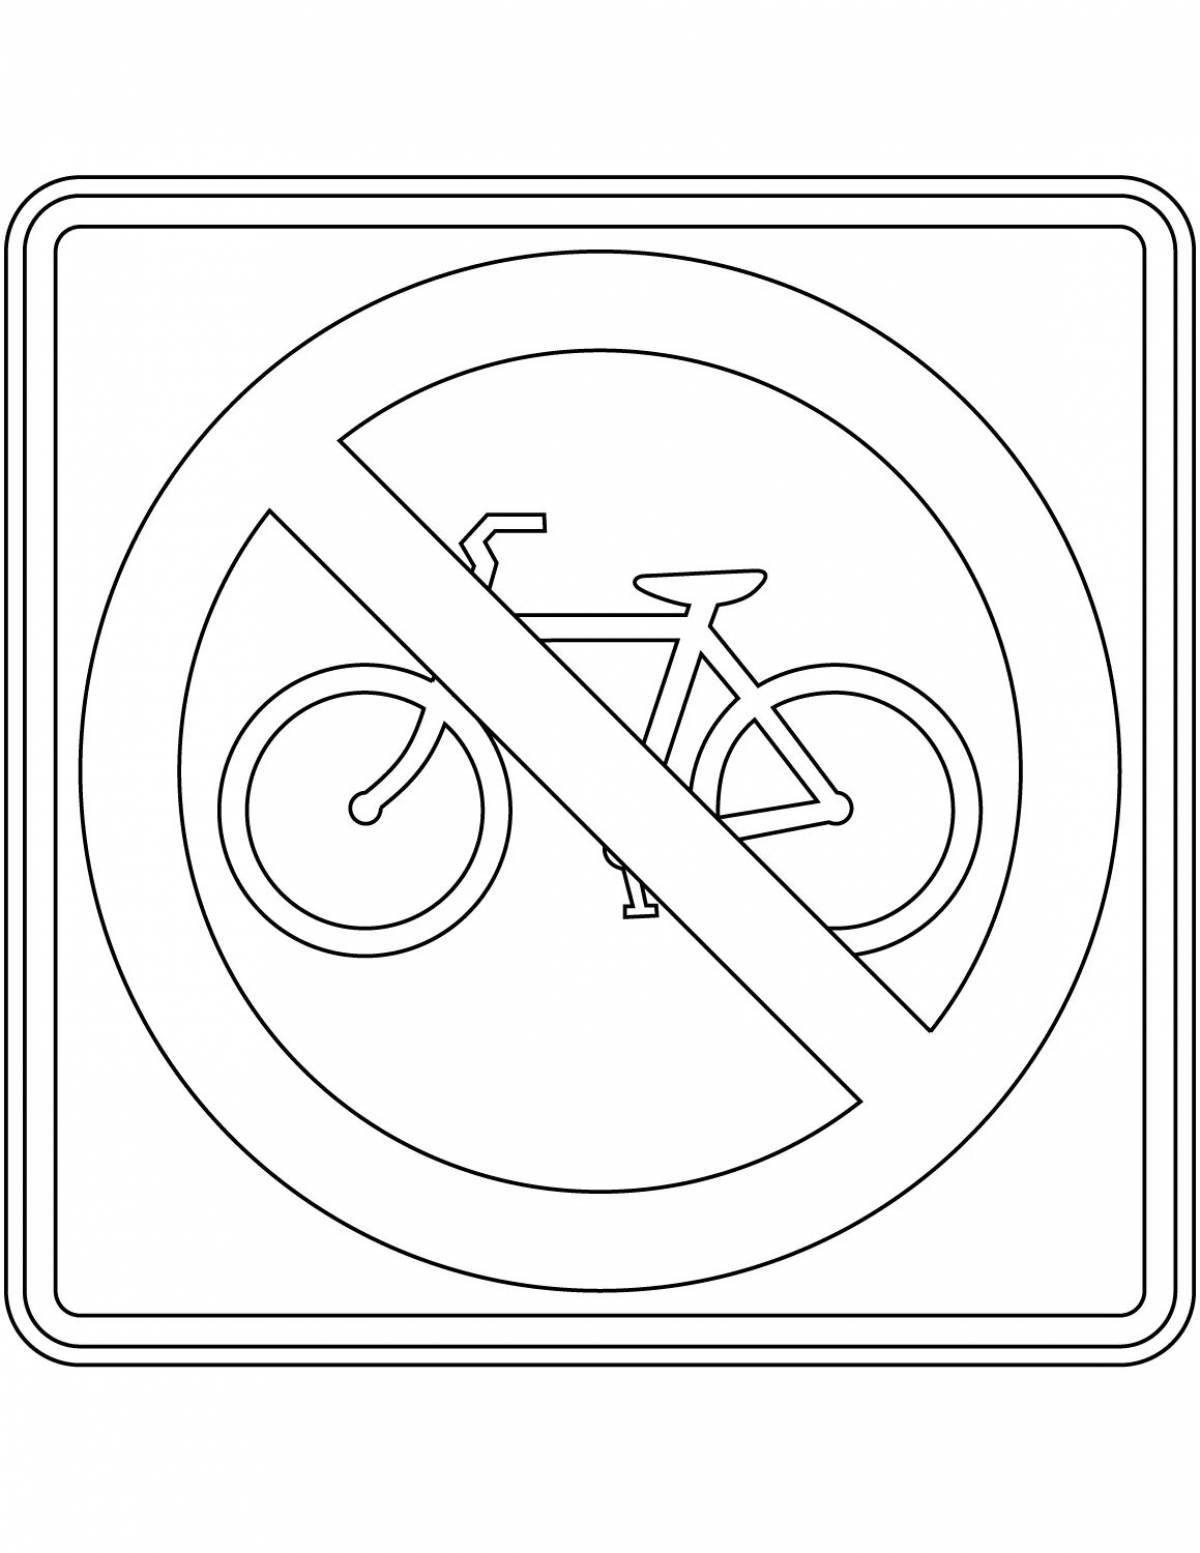 Coloring page fascinating road sign